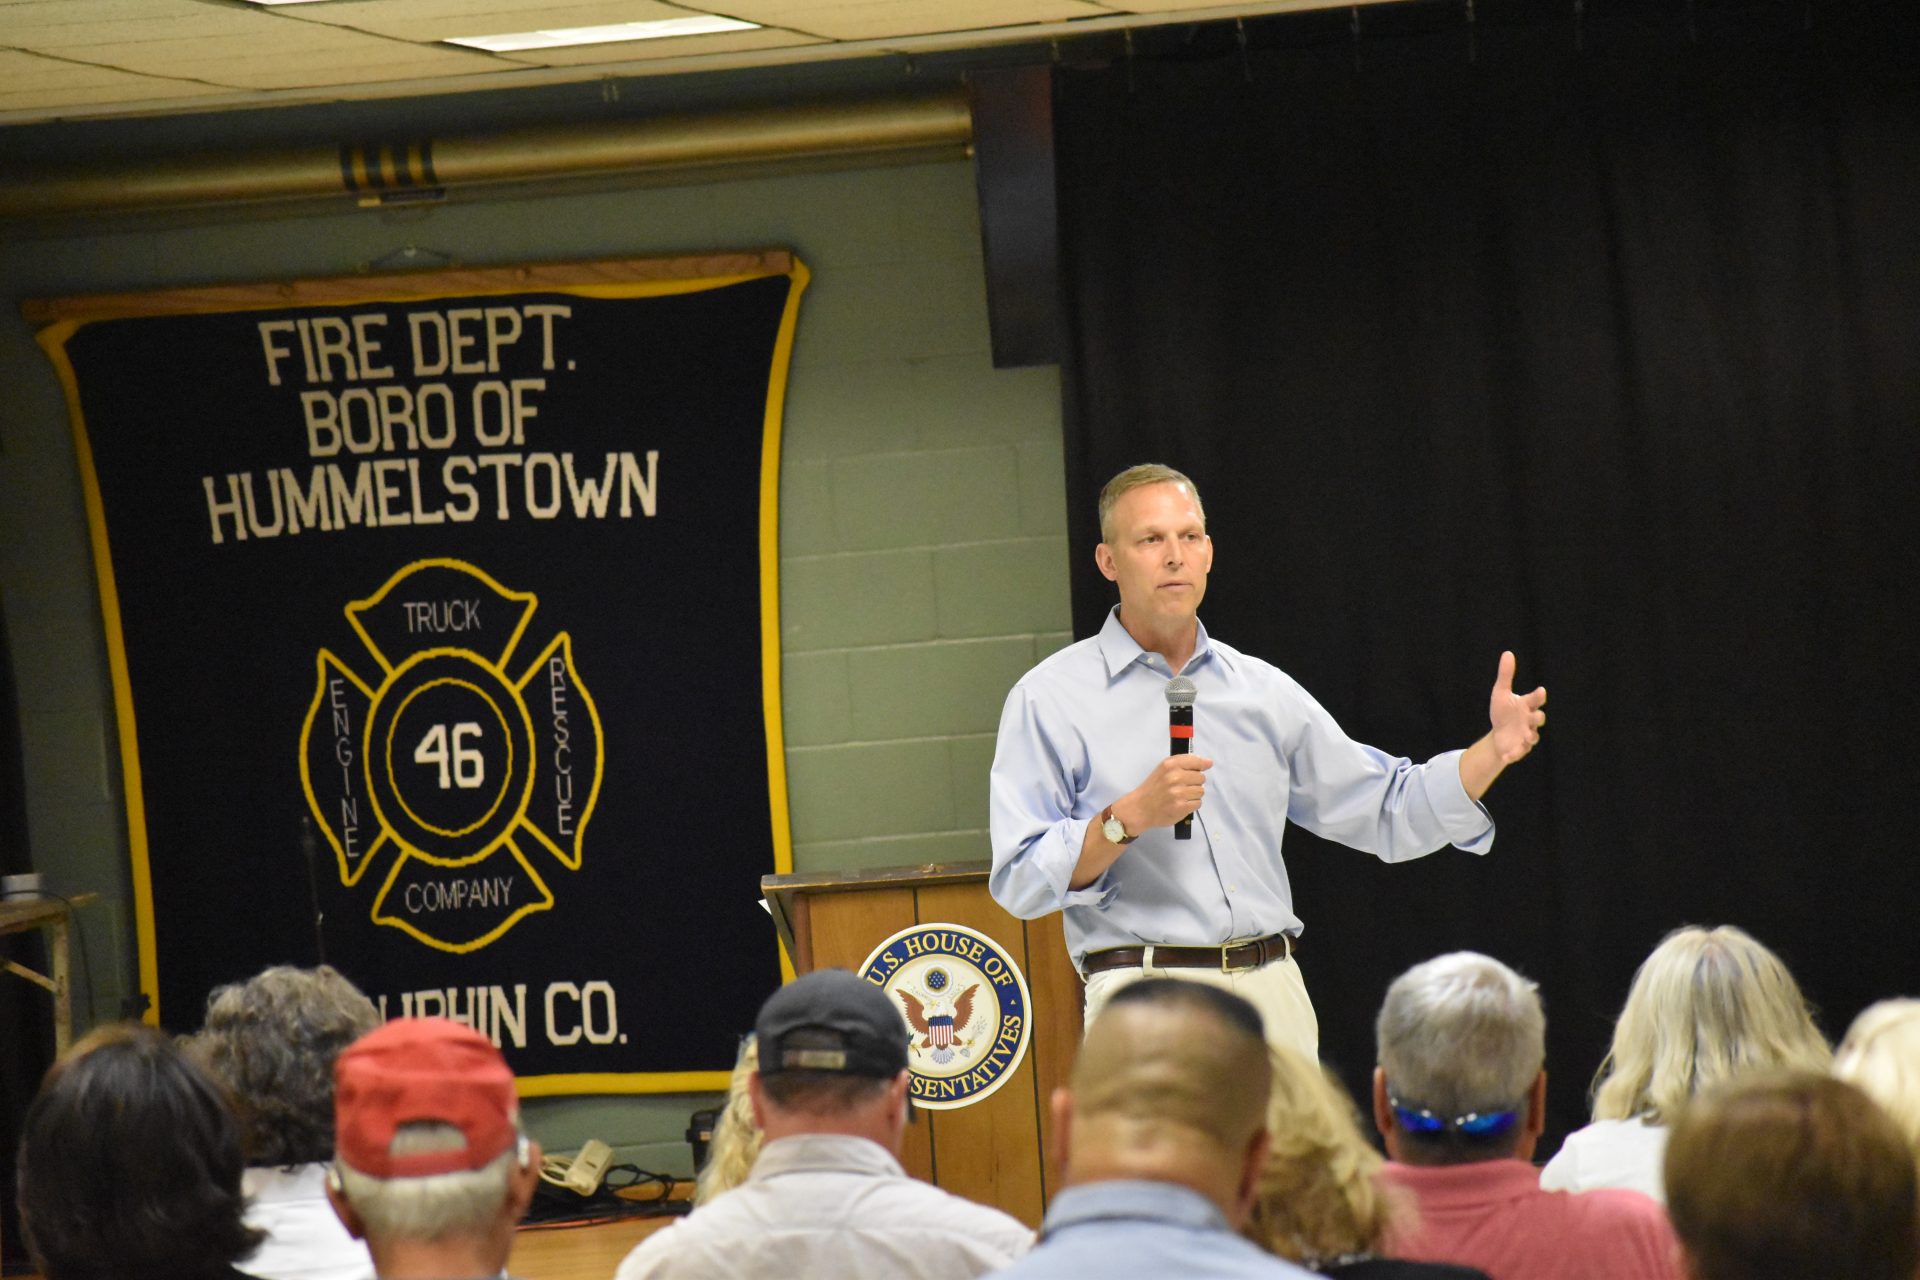 U.S. Rep. Scott Perry speaks to the crowd during a town hall at Hummelstown Fire Department on July 30, 2019.